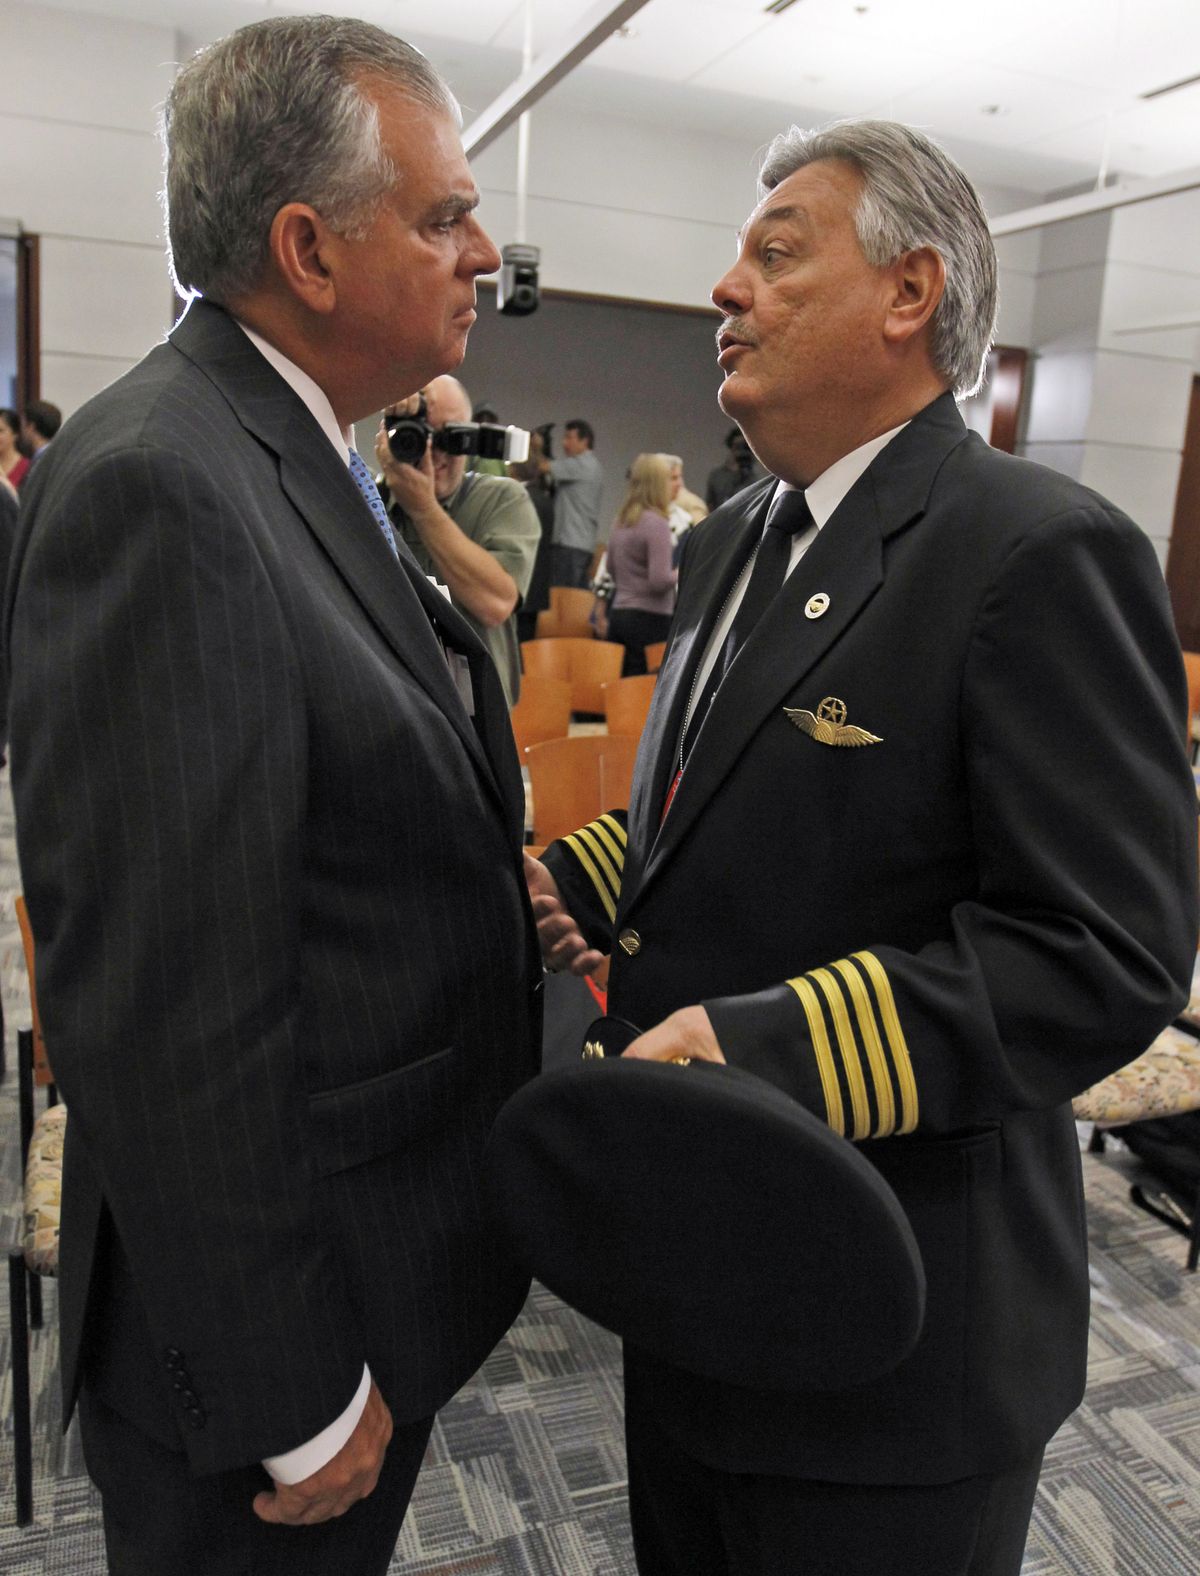 Transportation Secretary Ray LaHood, left, talks with Captain John H. Prater, president of the Air Line Pilots Association, after a  news conference in Washington on Friday to announce proposed rule changes.  (Associated Press)